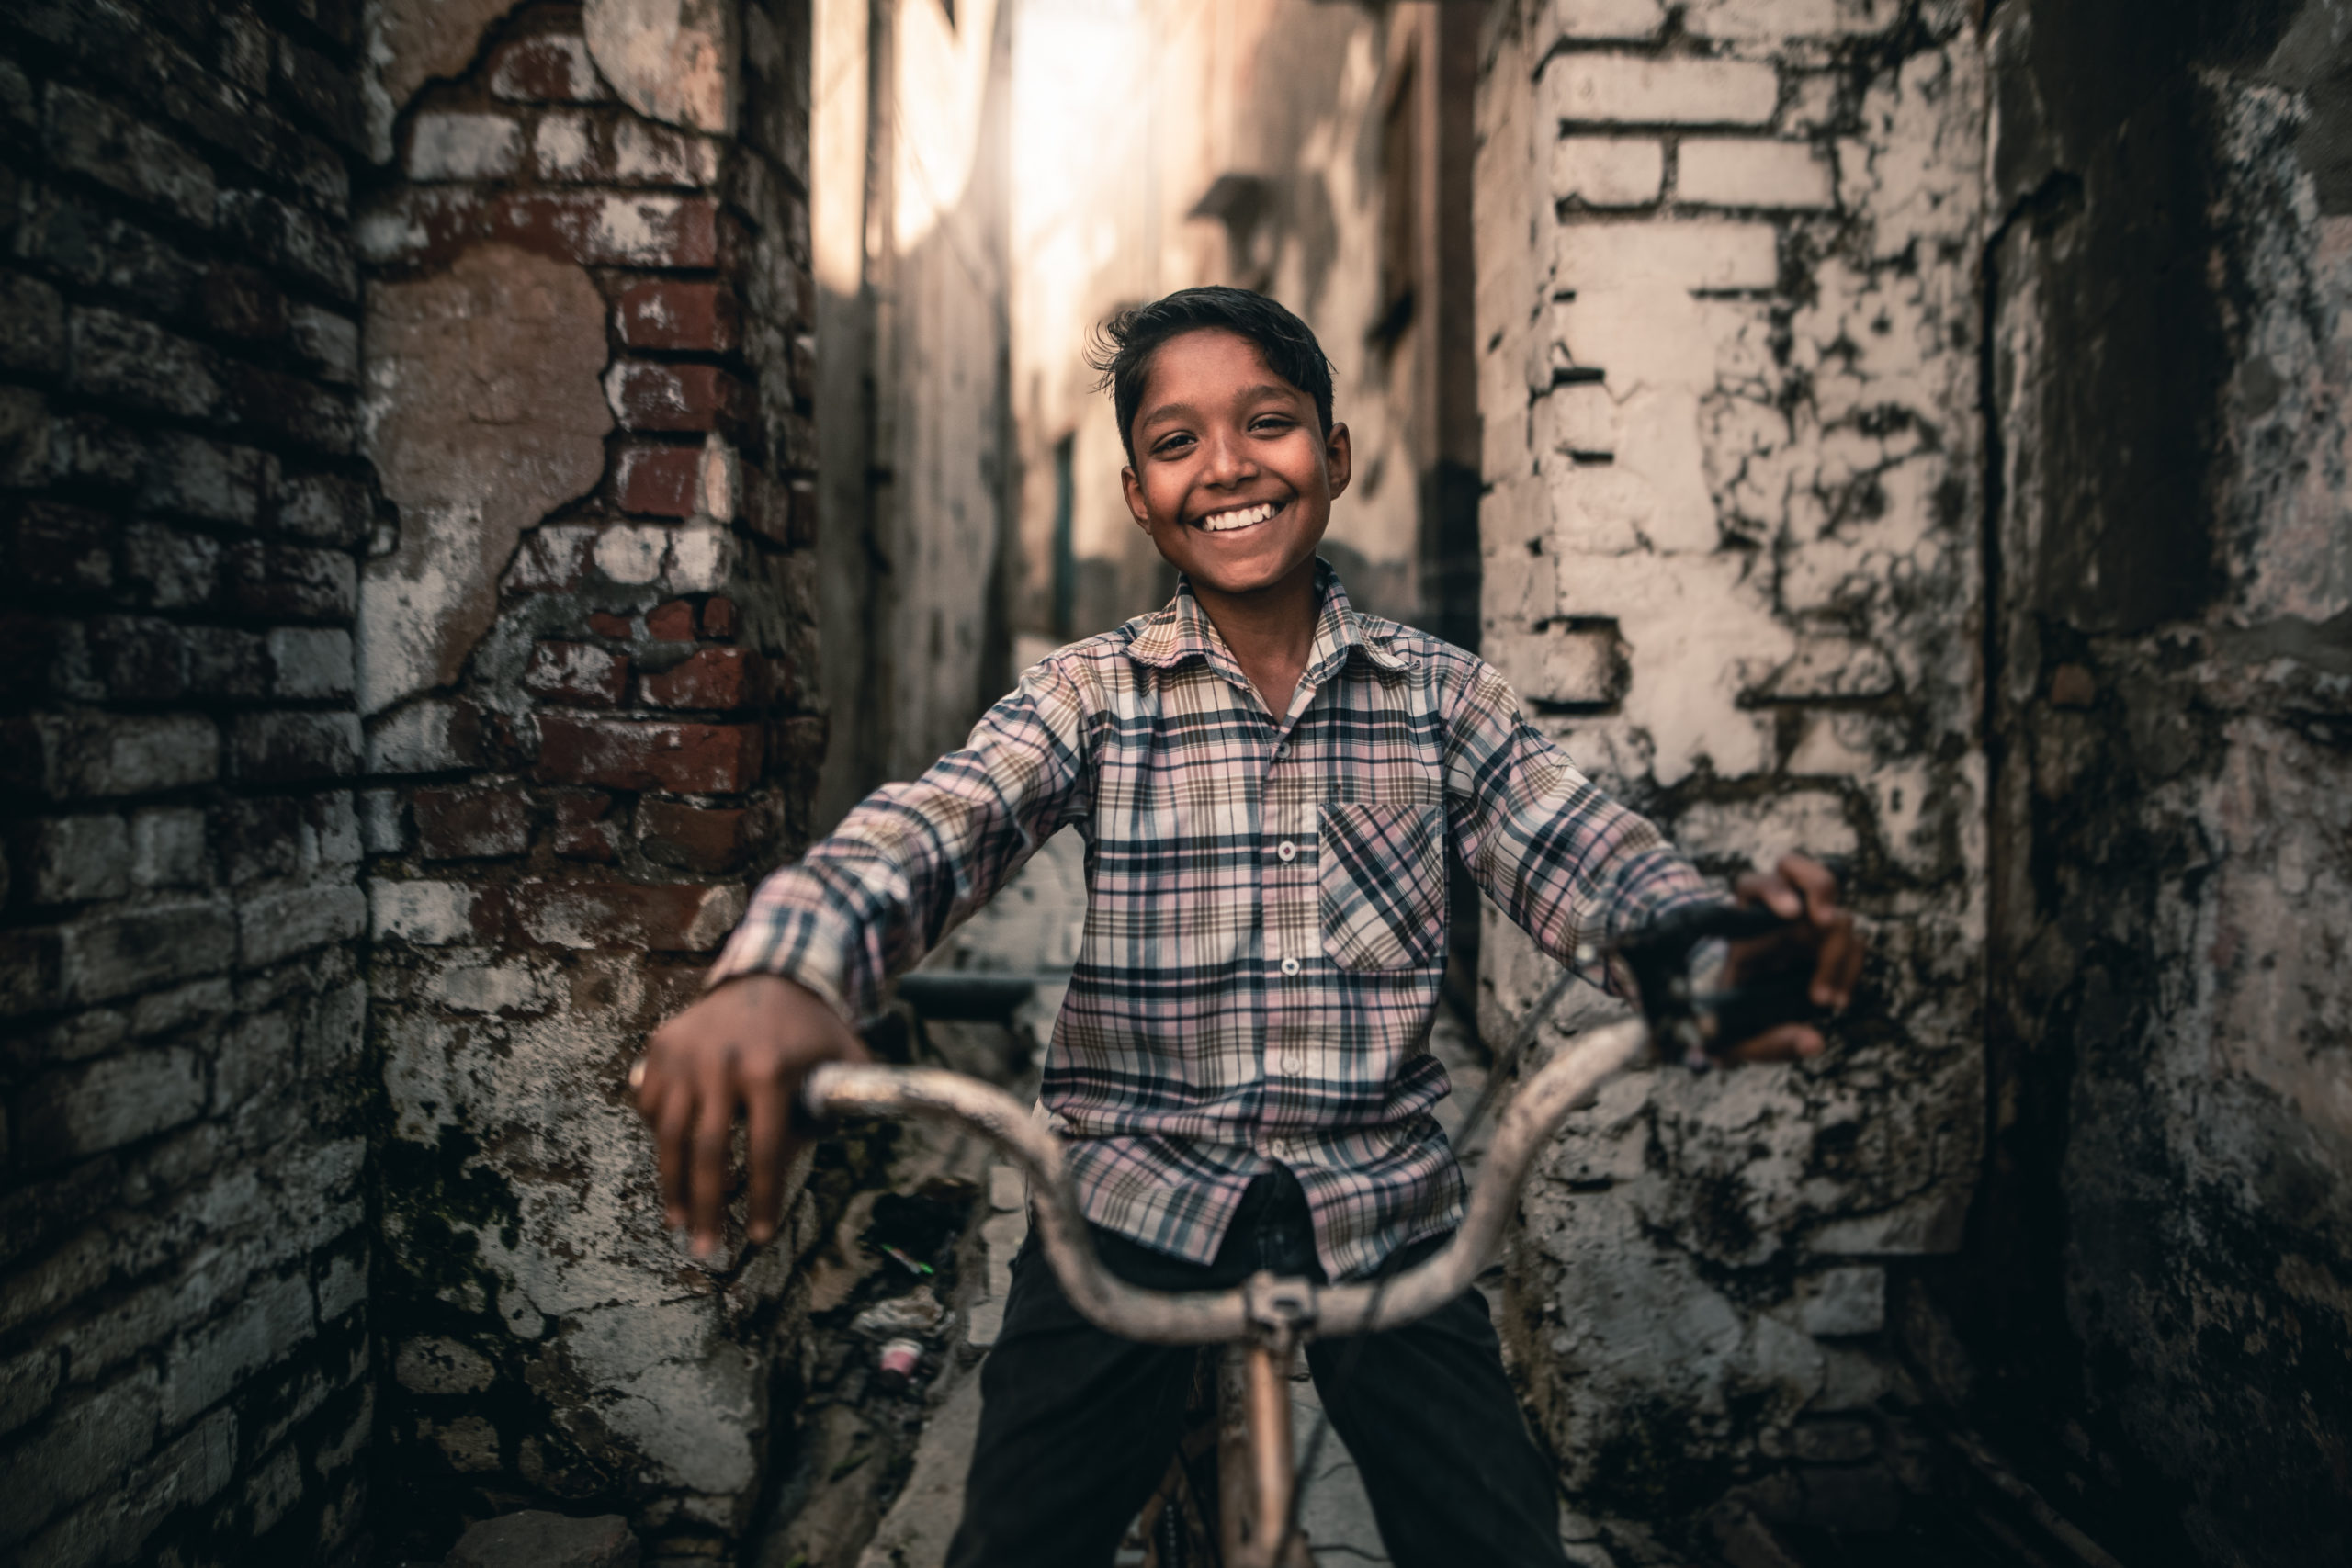 Portrait-Street Photography of a young boy on a bike in the streets of Mathura, India